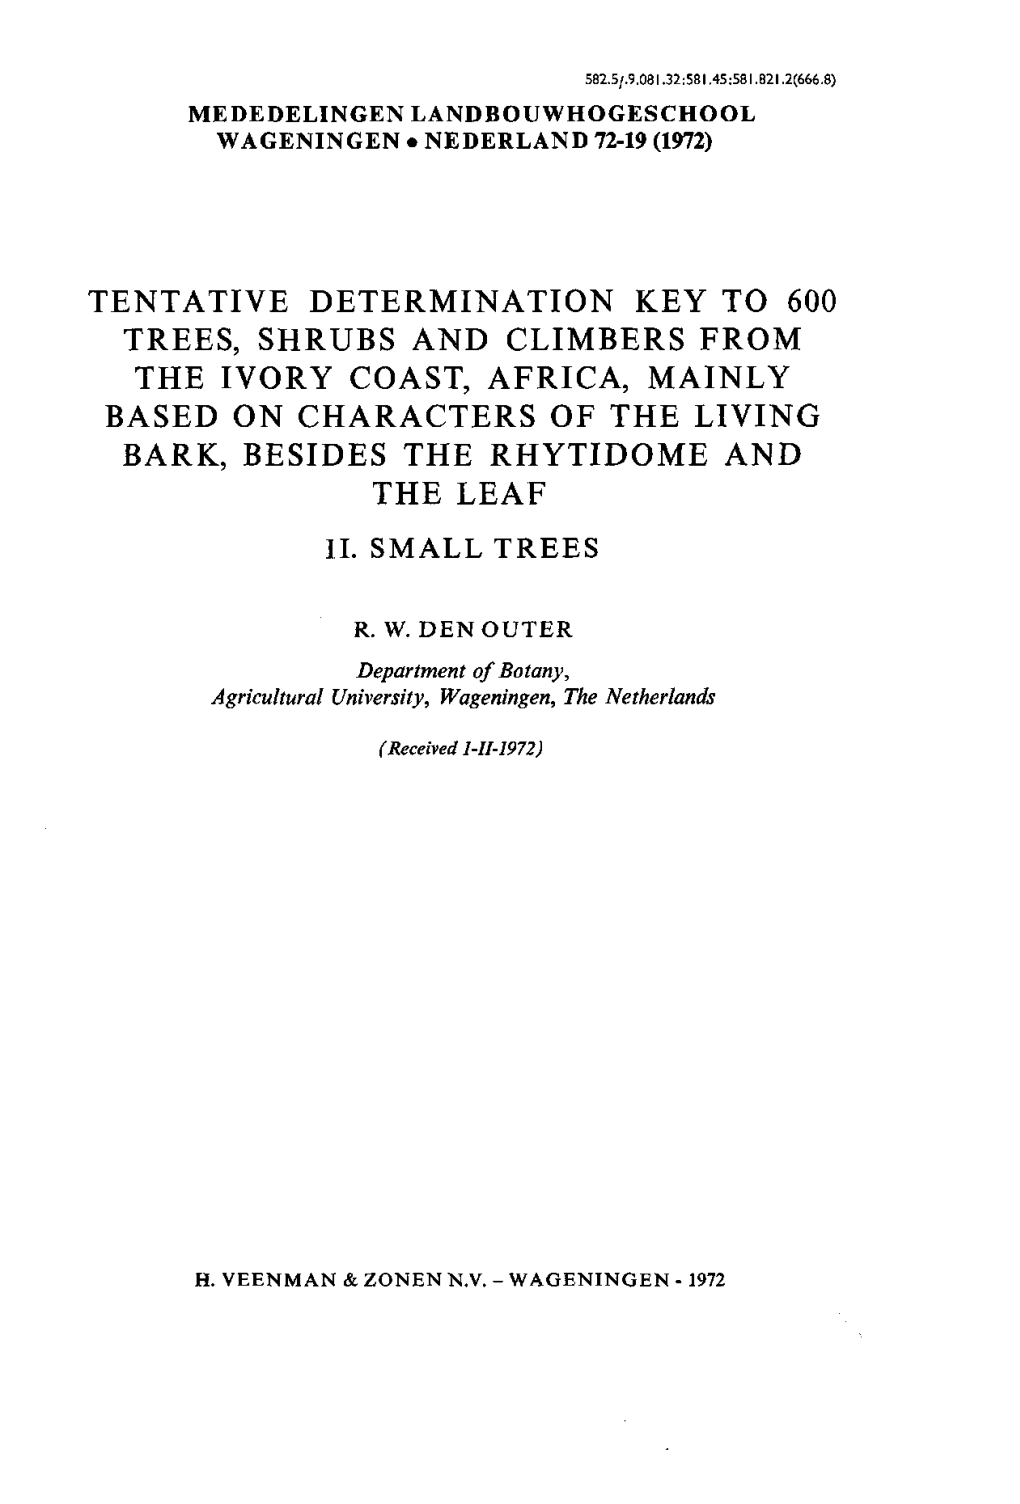 Tentative Determination Key to 600 Trees, Shrubs and Climbers from the Ivory Coast, Africa, Mainly Based on Characters of the Li